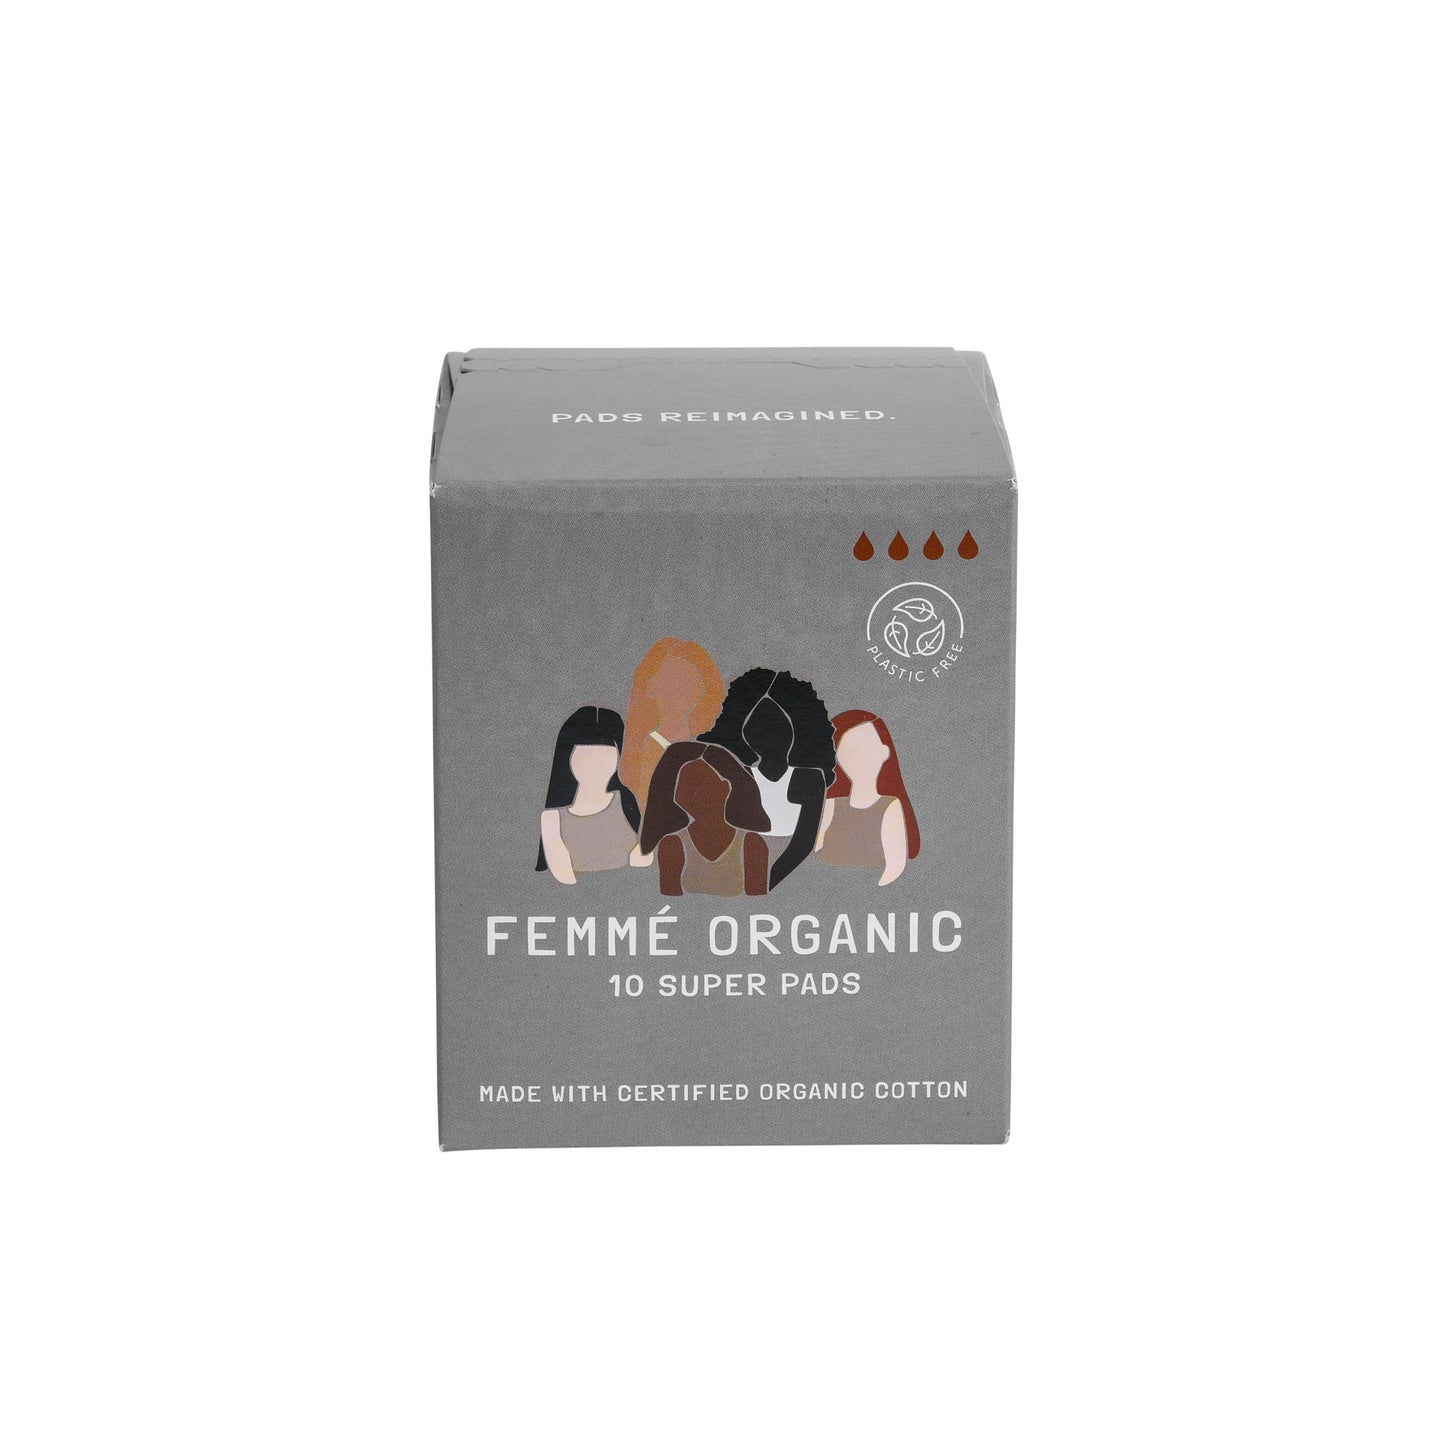 Femme Organic Super Pad Products in Carton: A box containing organic super pads for feminine hygiene.